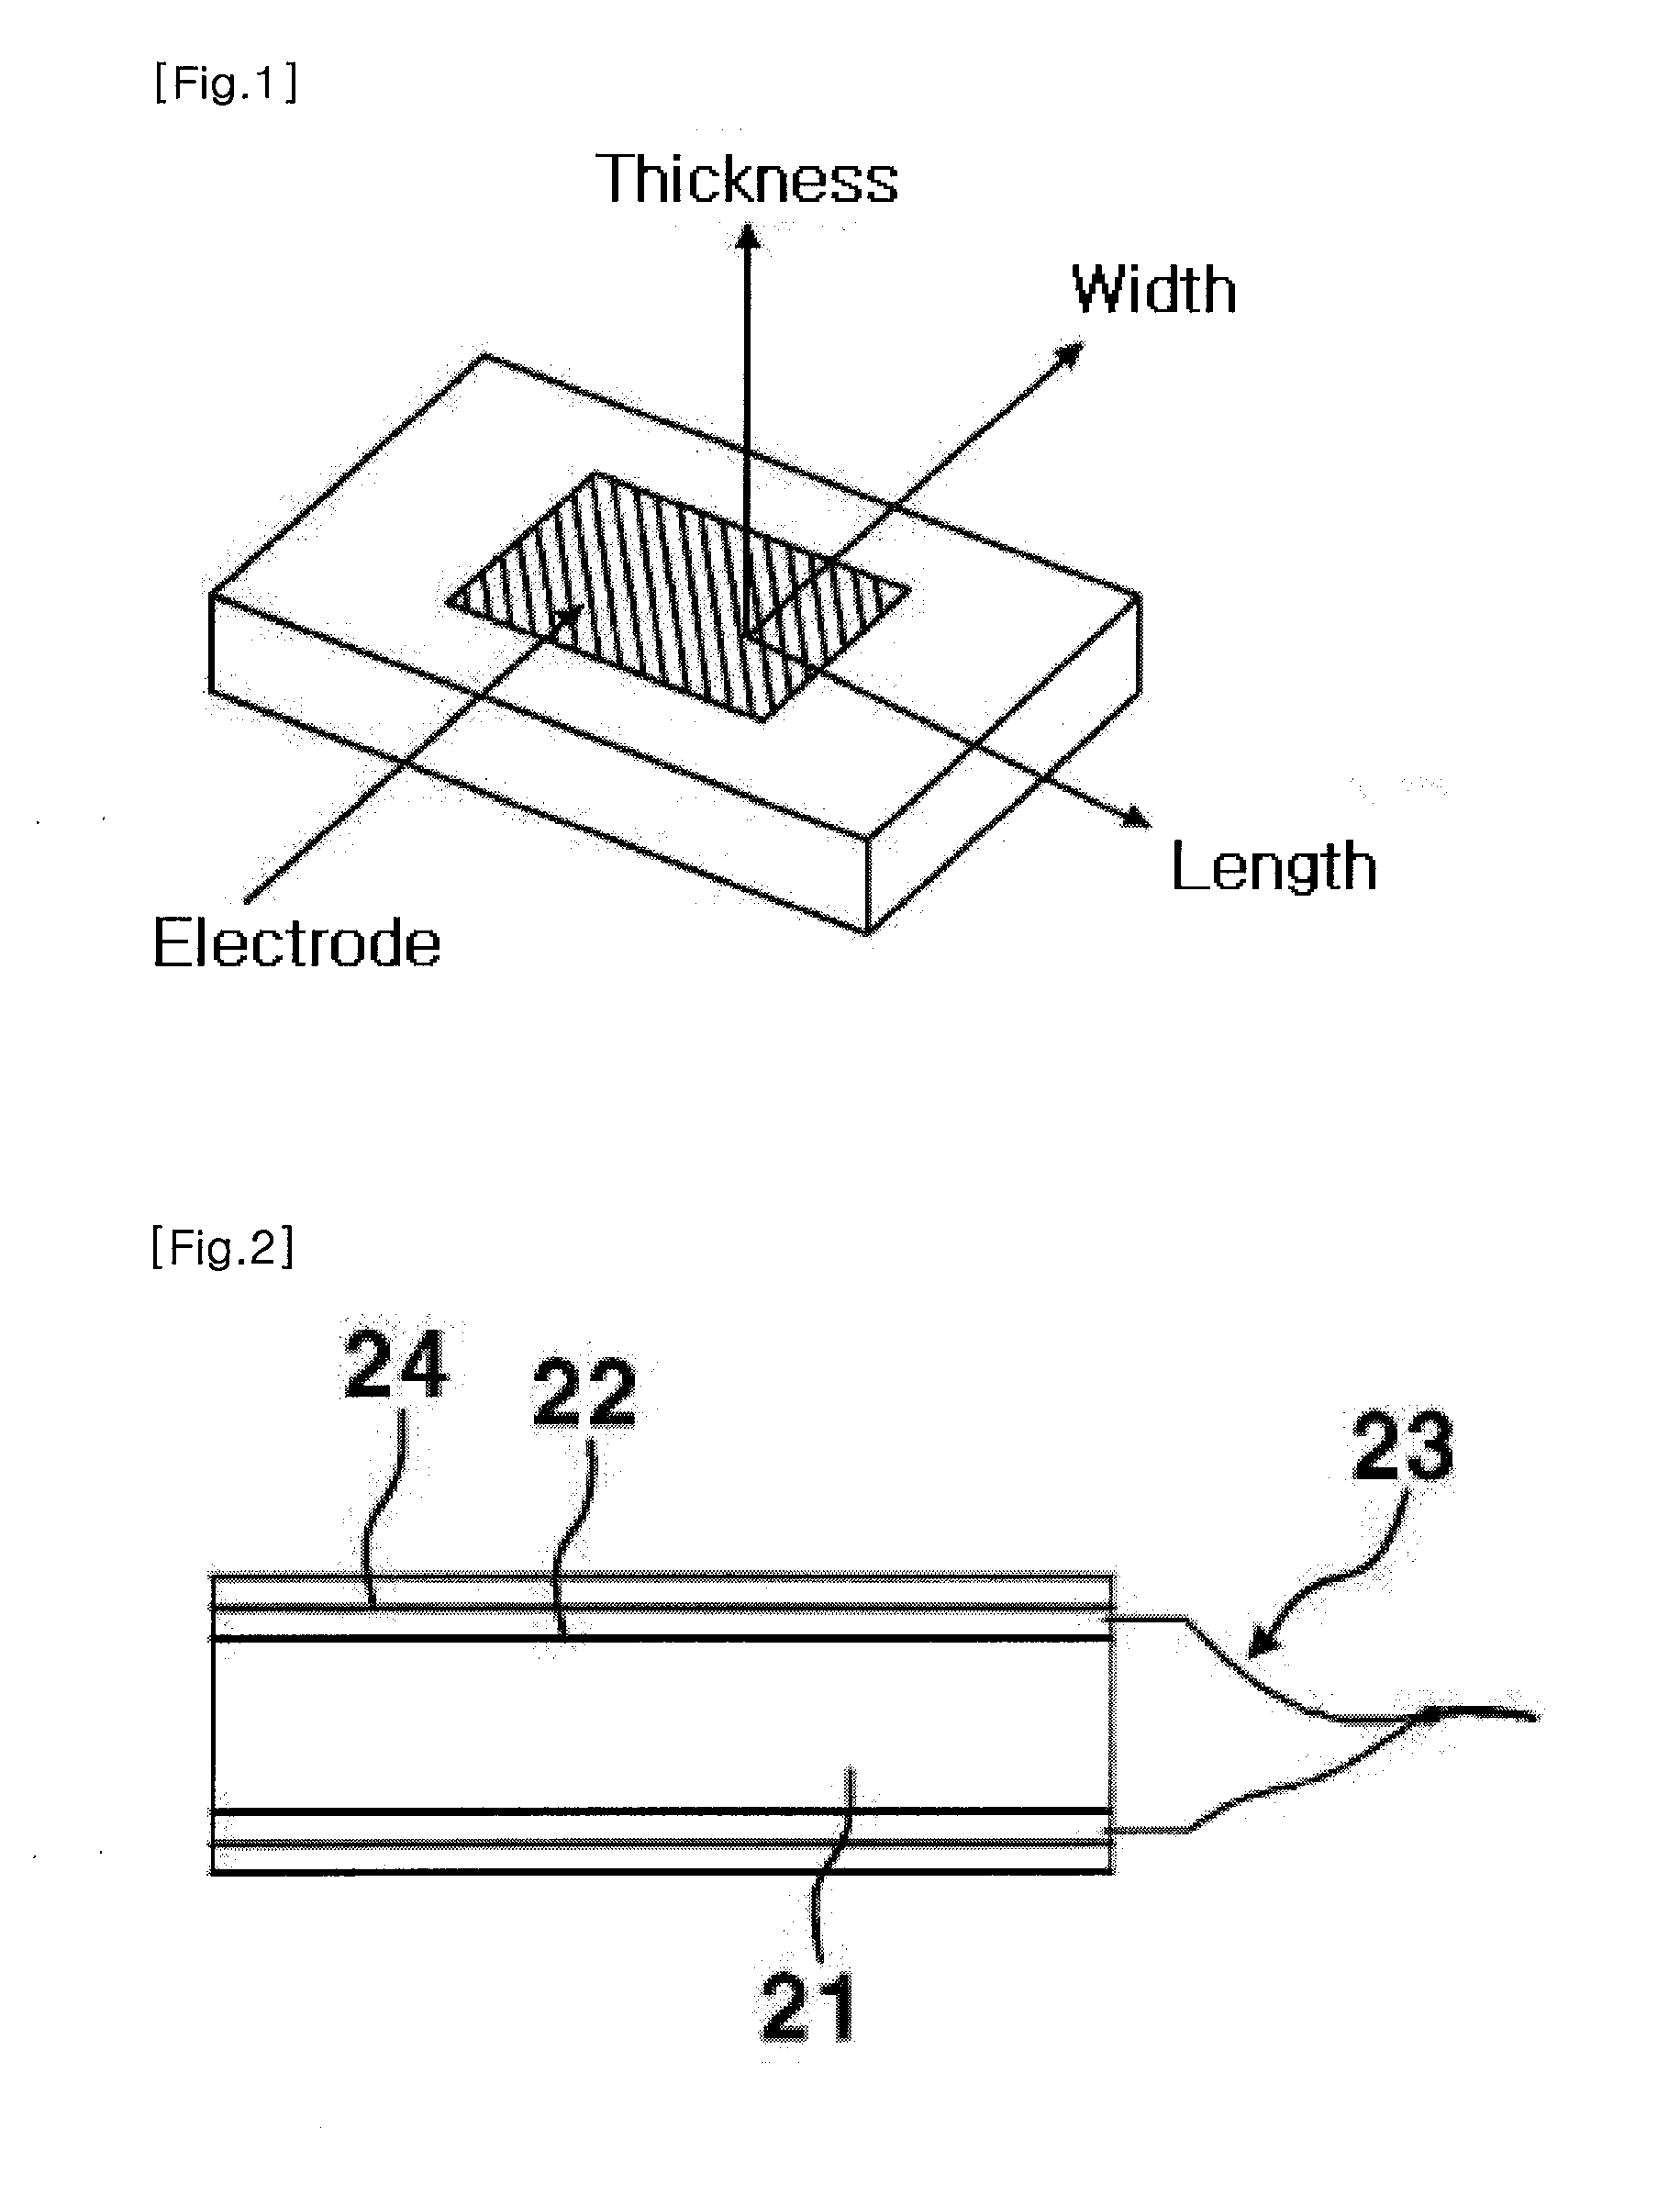 Sensor comprising a material which generates an electrical signal in response to elongation